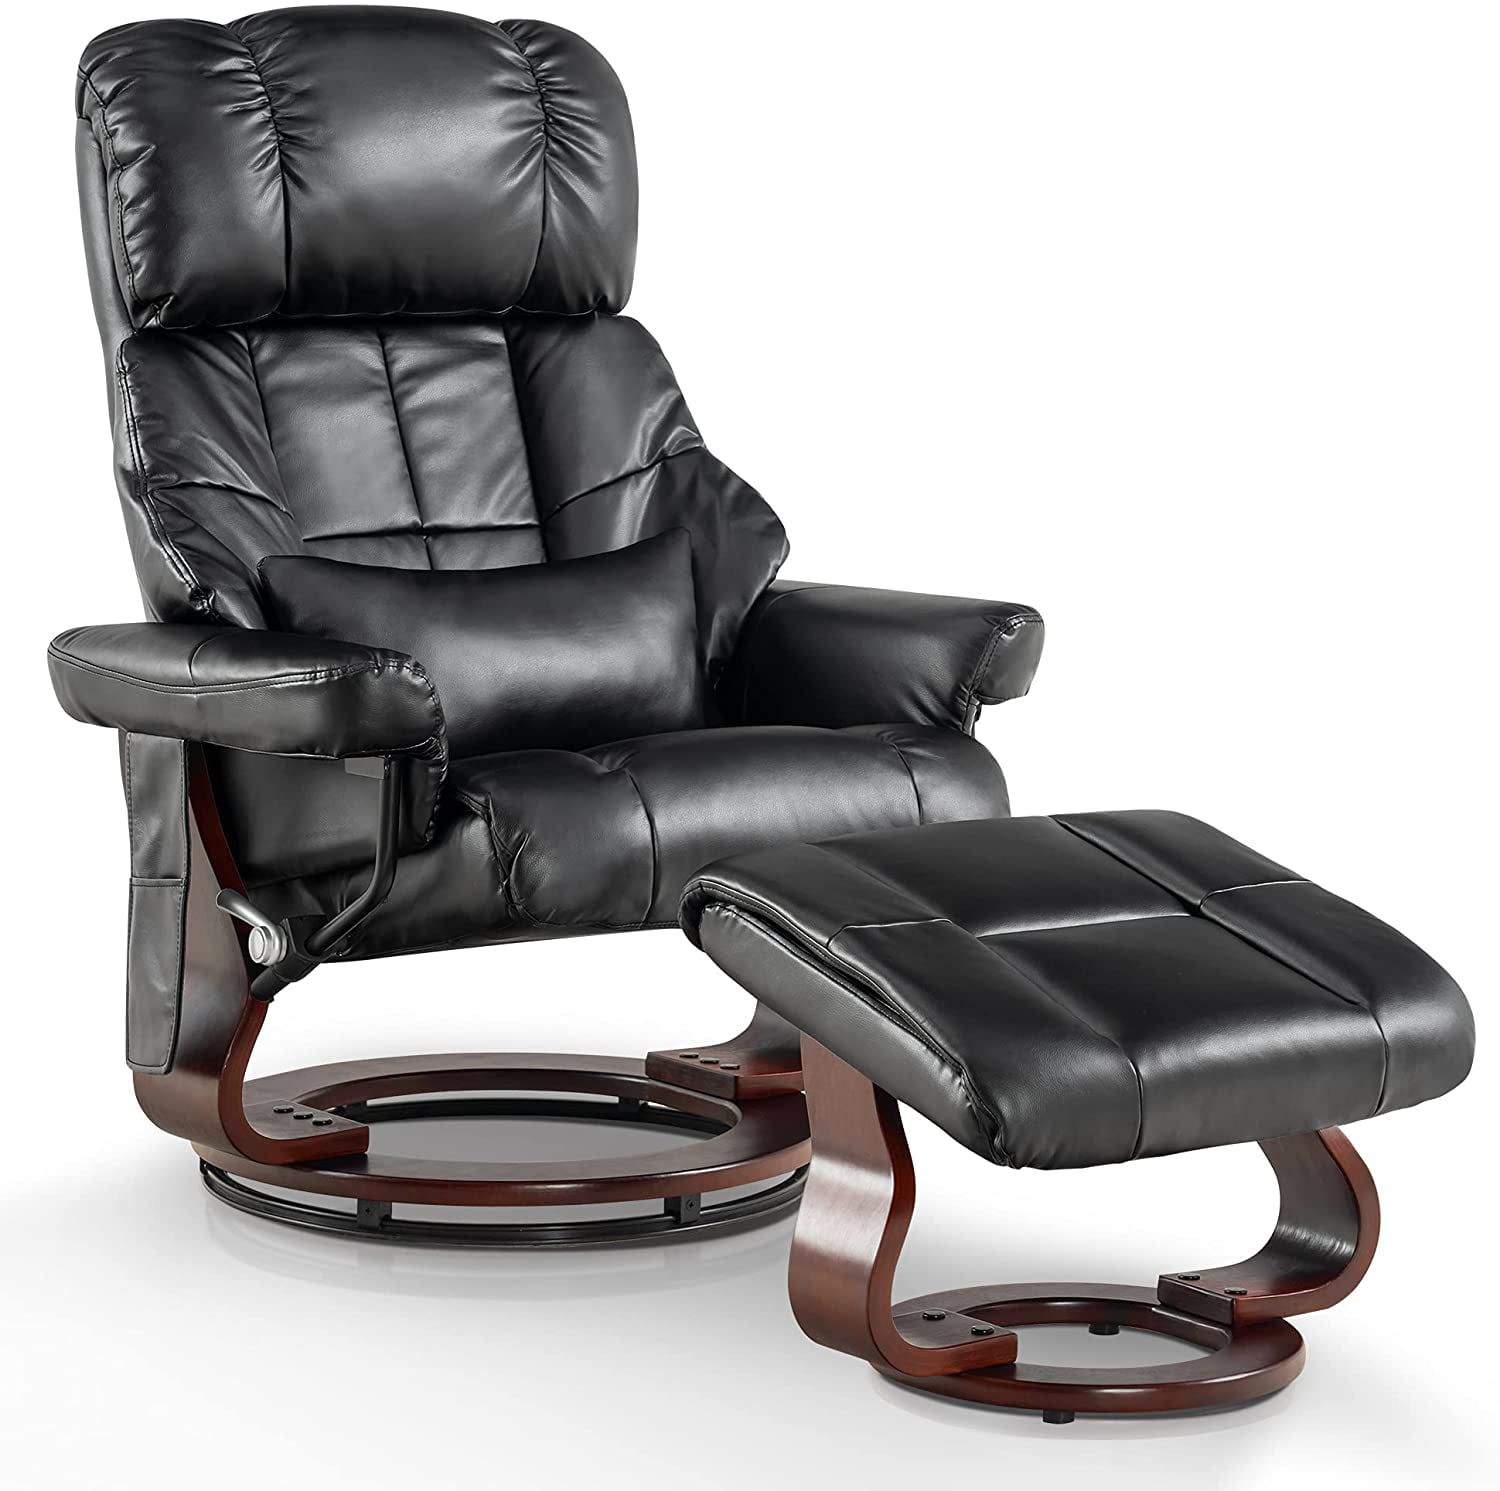 Mcombo Recliner With Ottoman Reclining, Contemporary Modern Leather Benchmarks